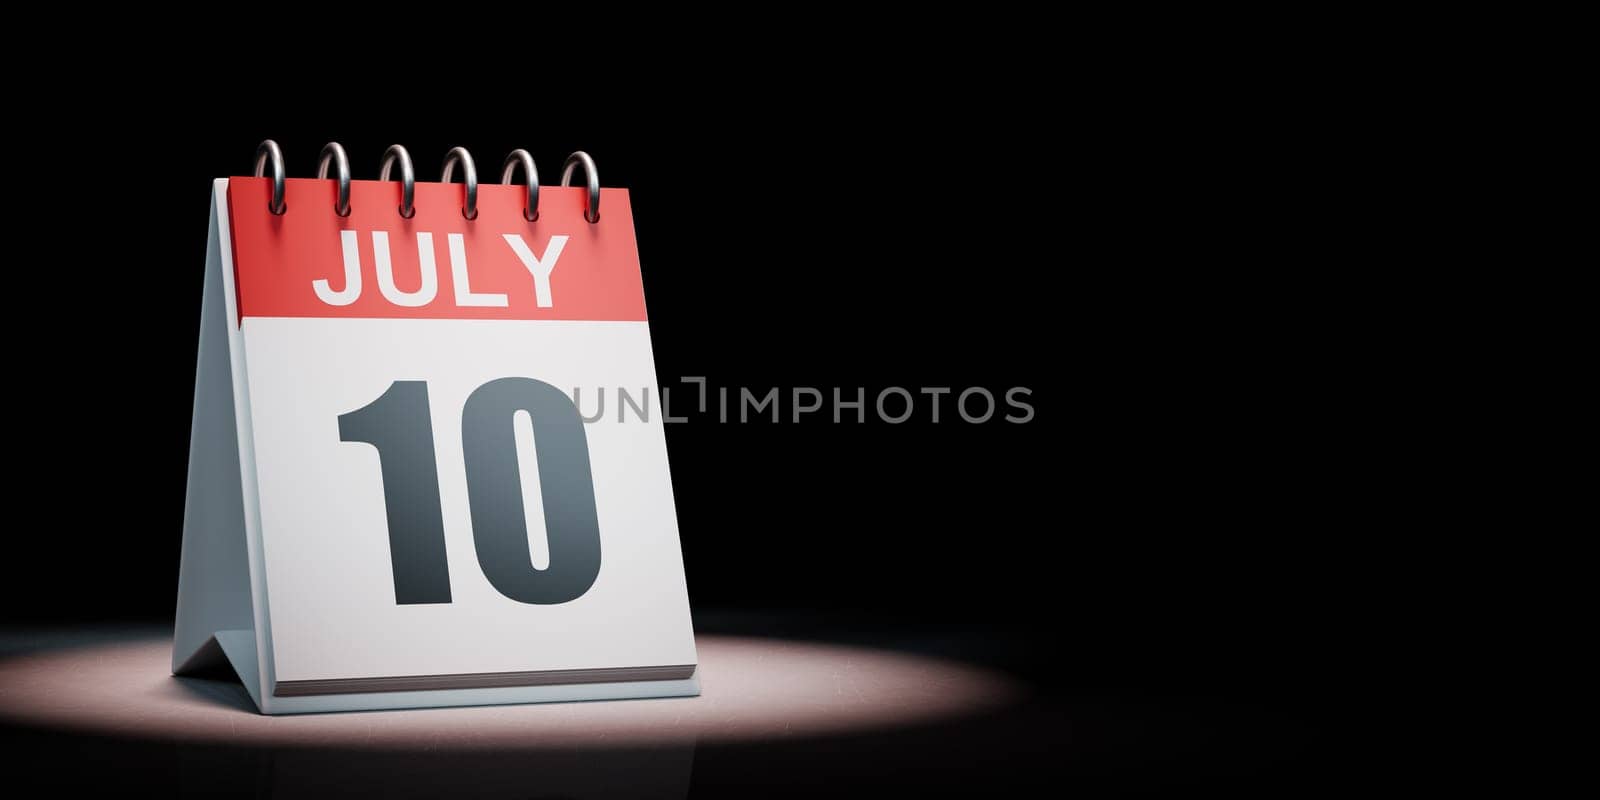 Red and White July 10 Desk Calendar Spotlighted on Black Background with Copy Space 3D Illustration